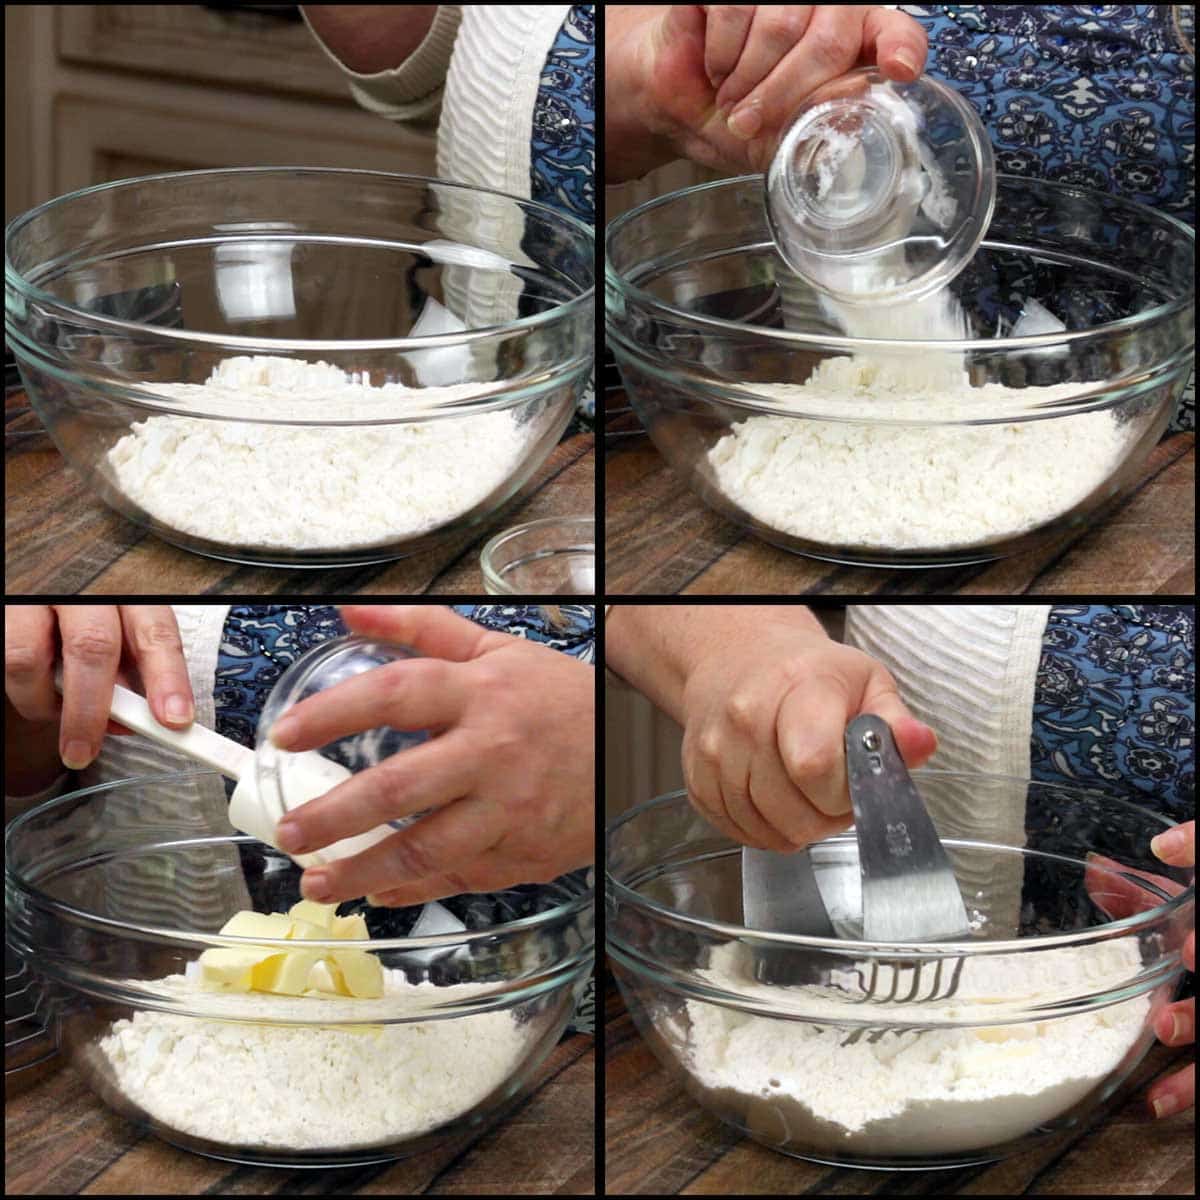 combing the dry ingredients with the butter